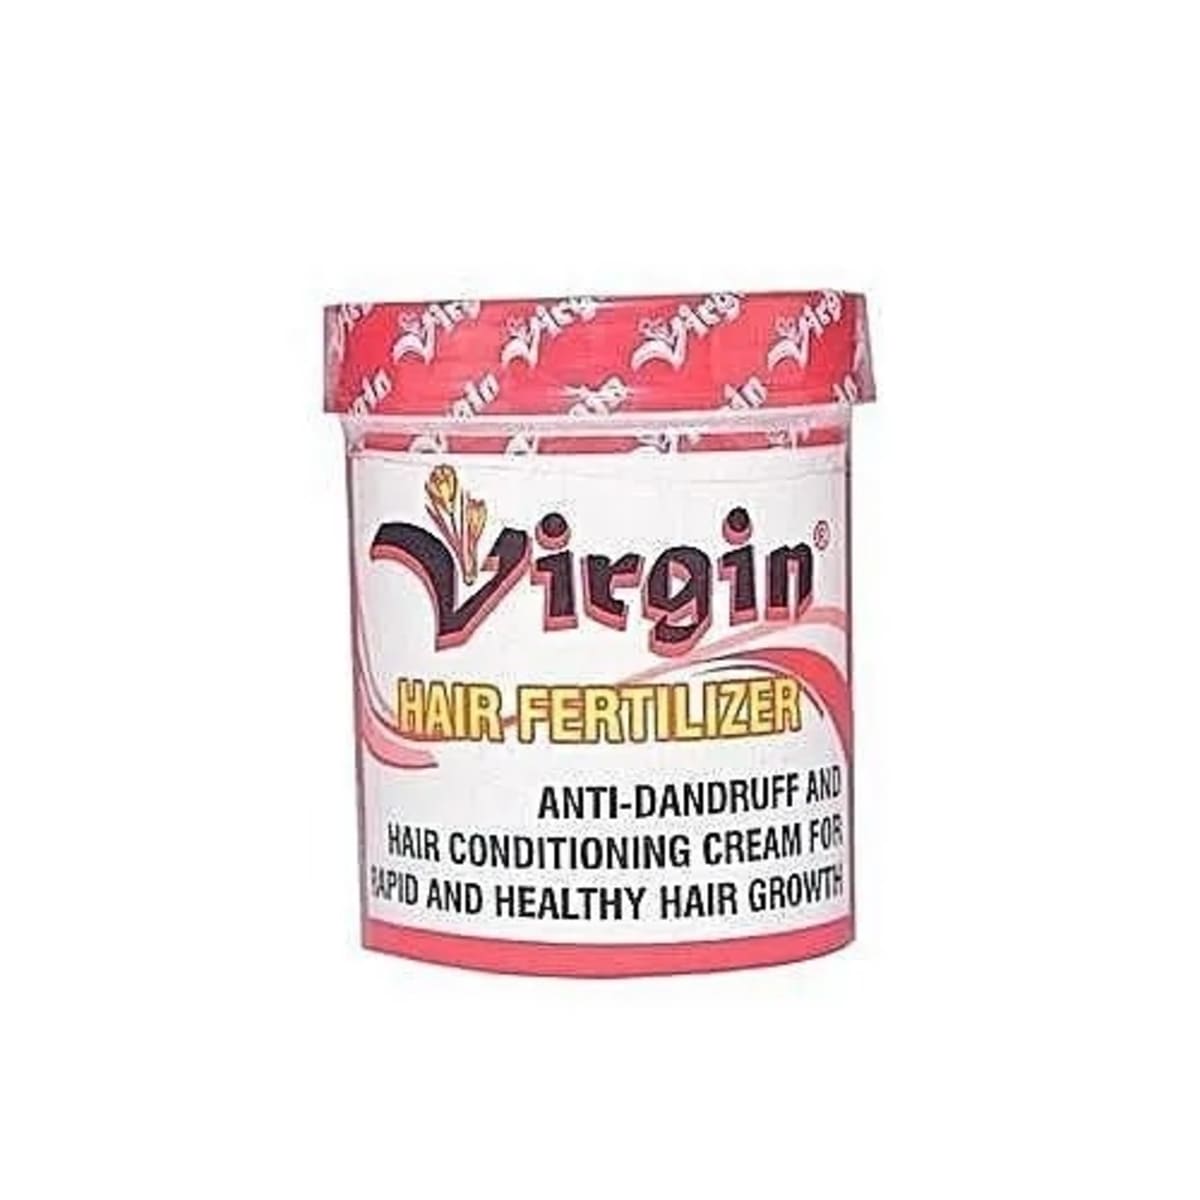 virgin hair fertilizer now wears a new name 2 pc pack by The Roots BEAUTY